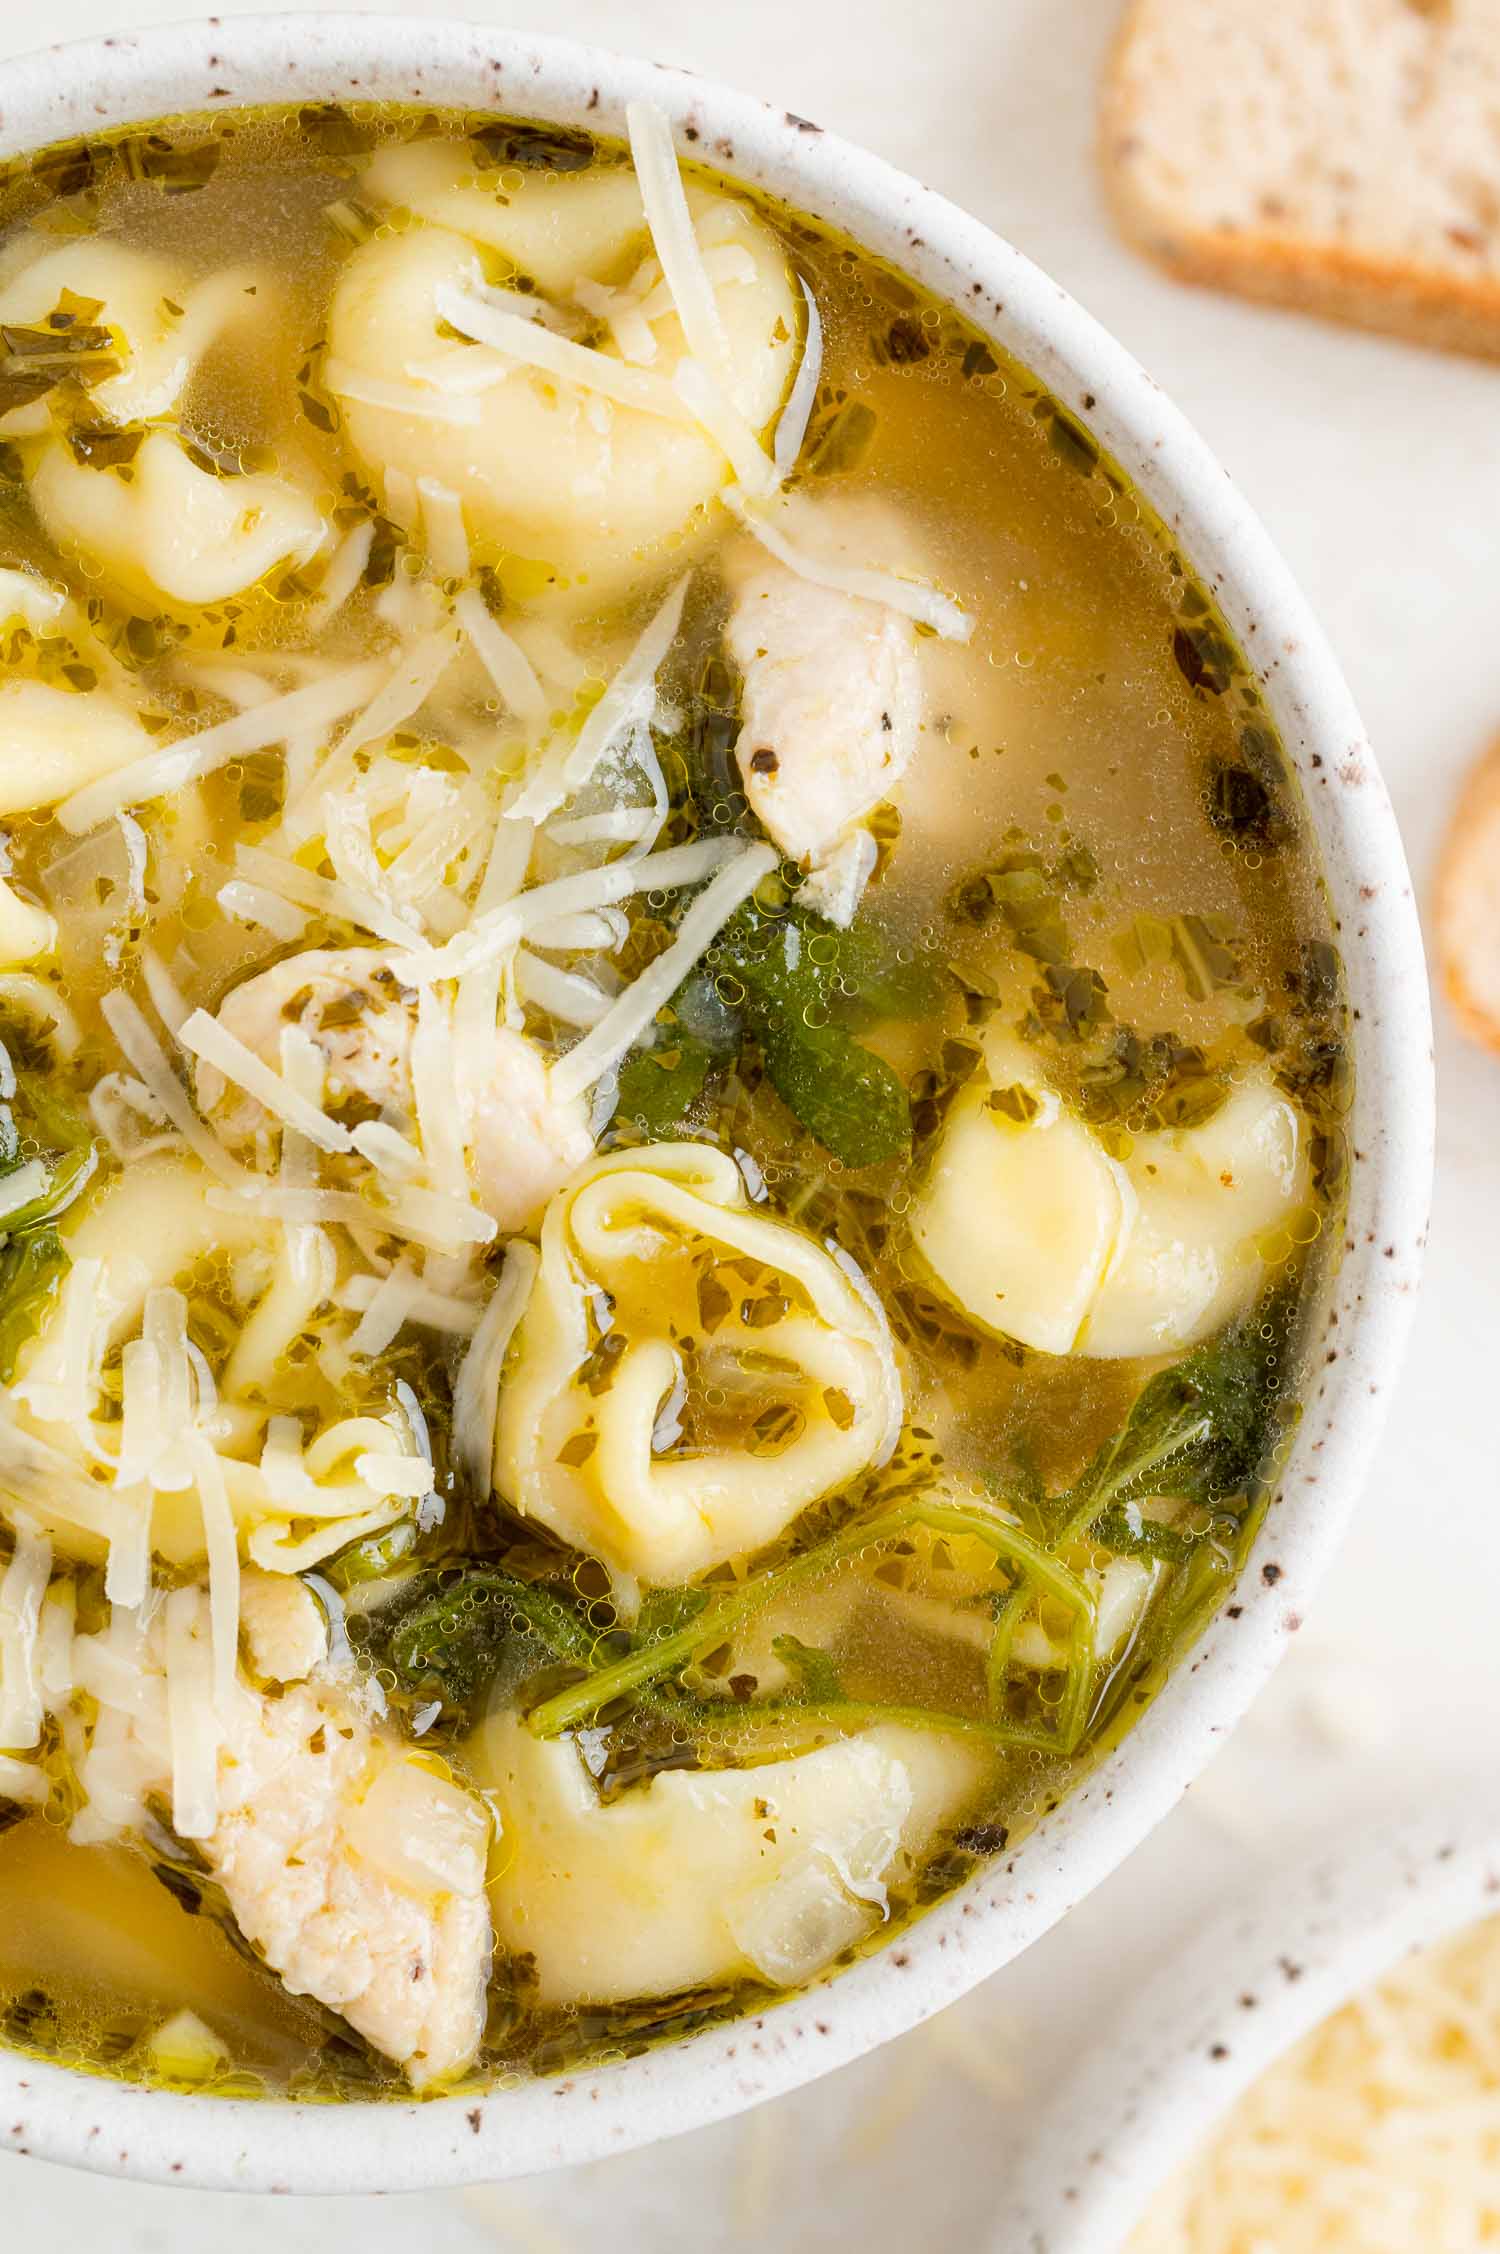 Chicken soup with kale, pesto, tortellini, in a white bowl.